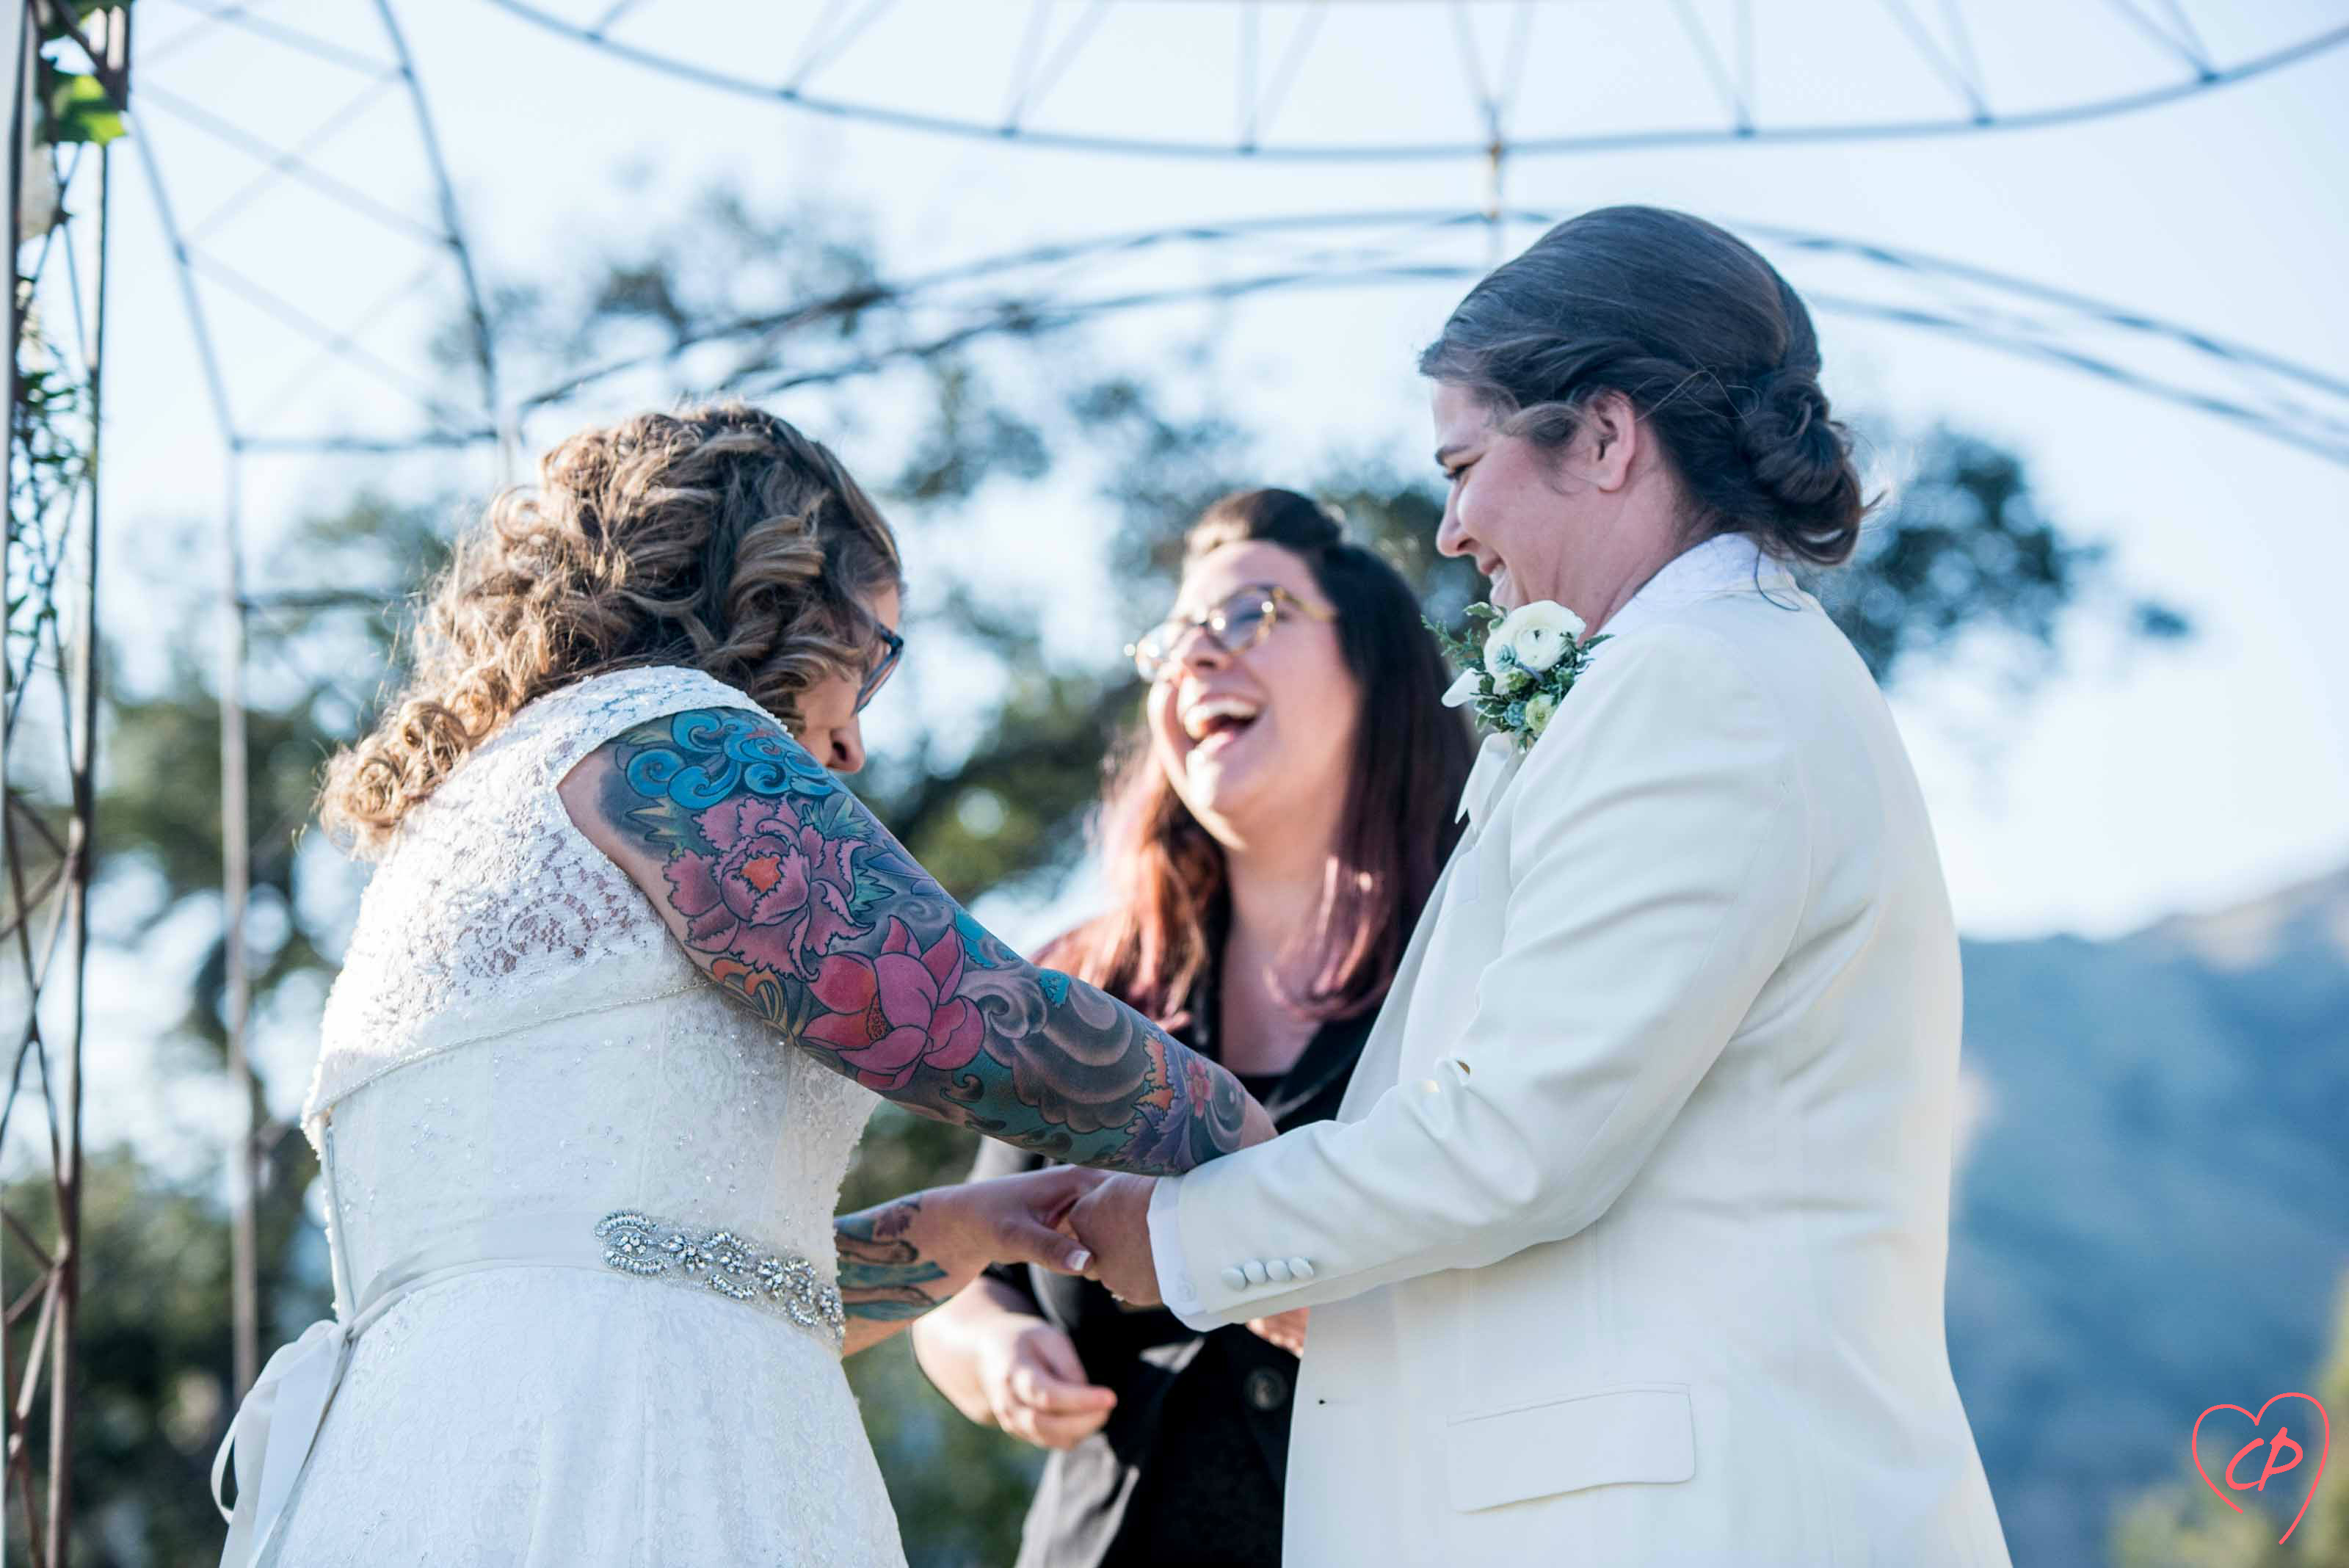 Tattooed bride Los Angeles LGBTQ wedding Let's Get Married by Marie offbeat wedding officiant